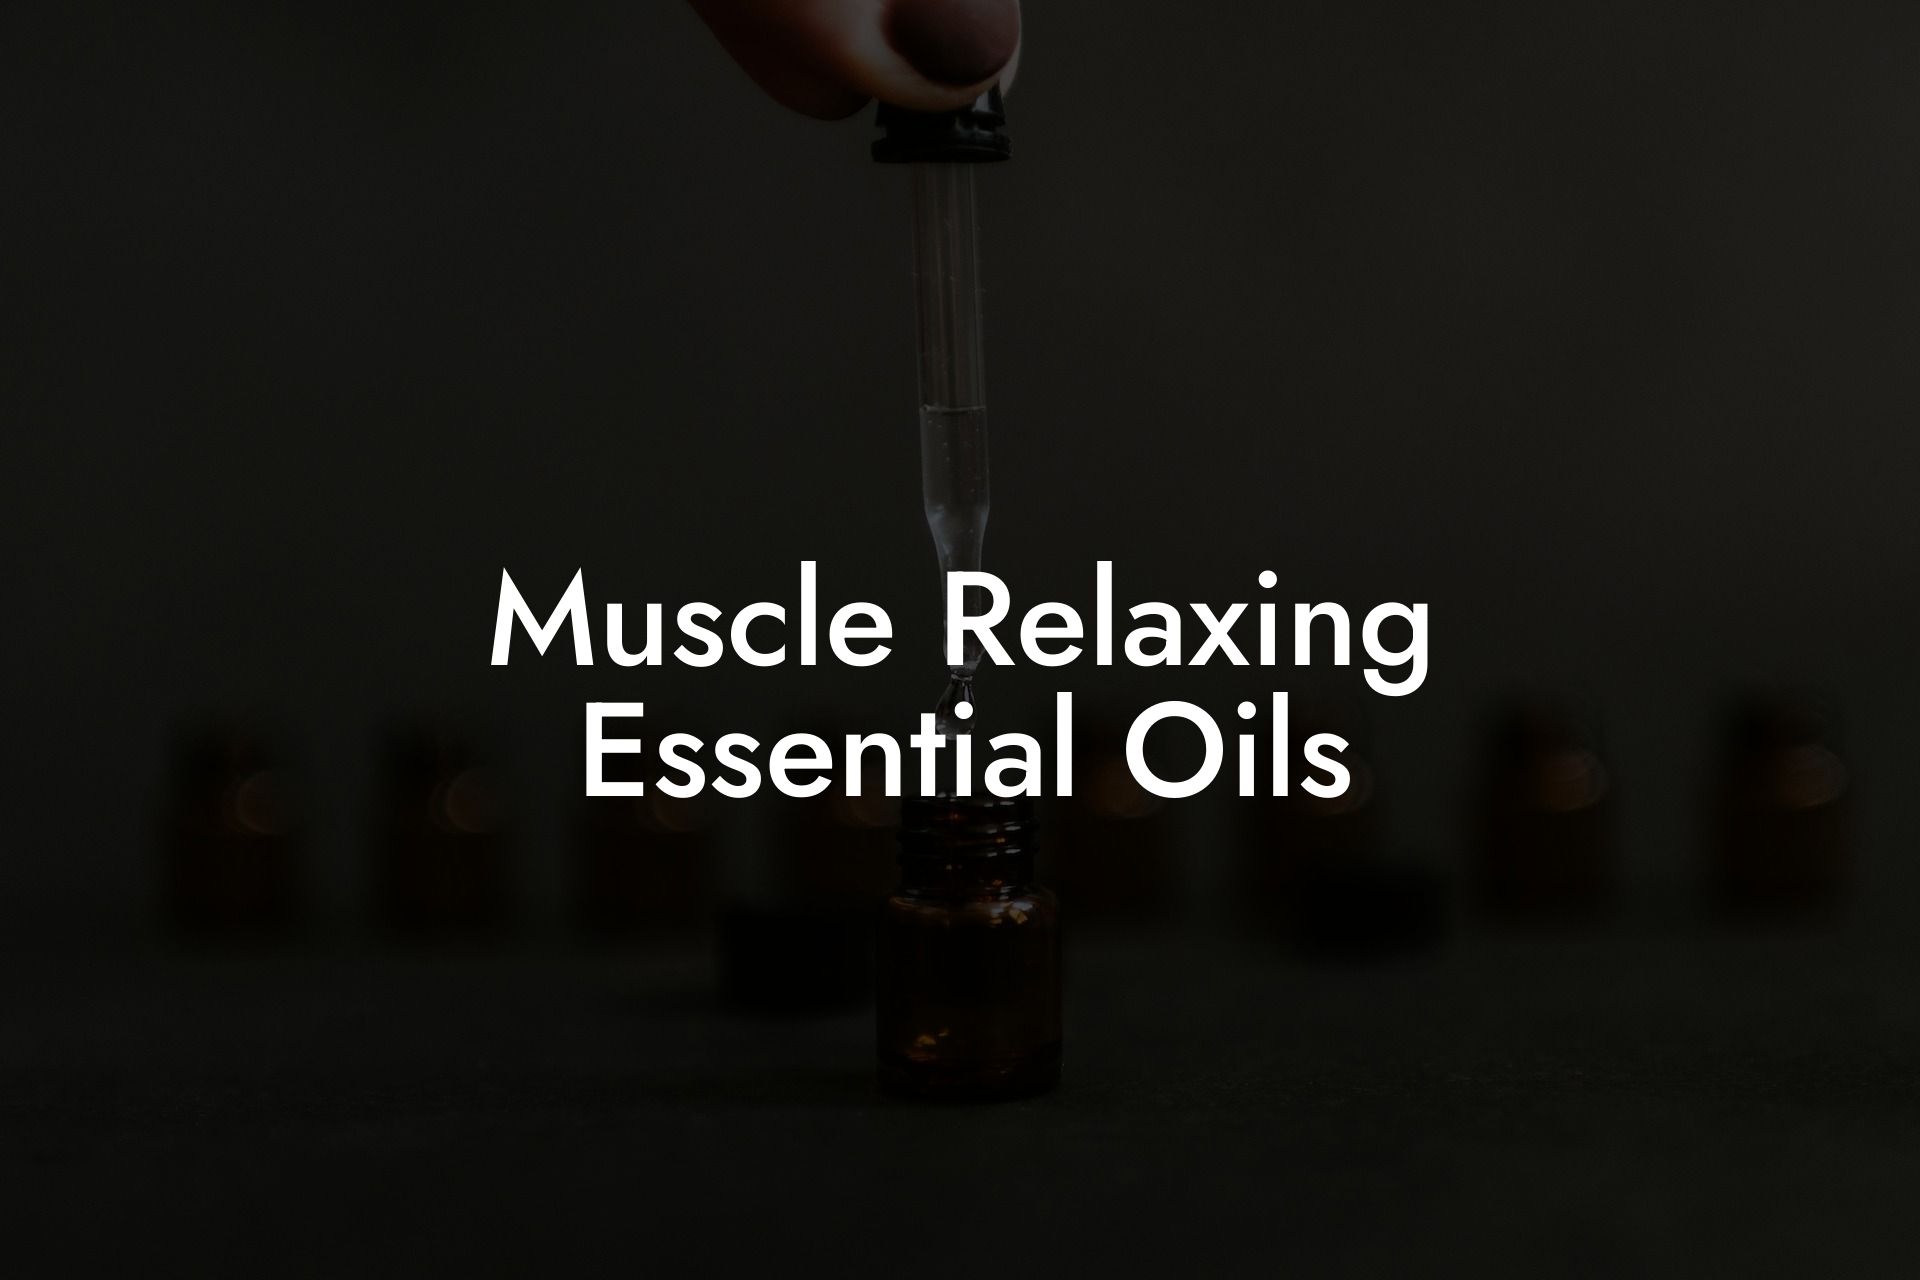 Muscle Relaxing Essential Oils